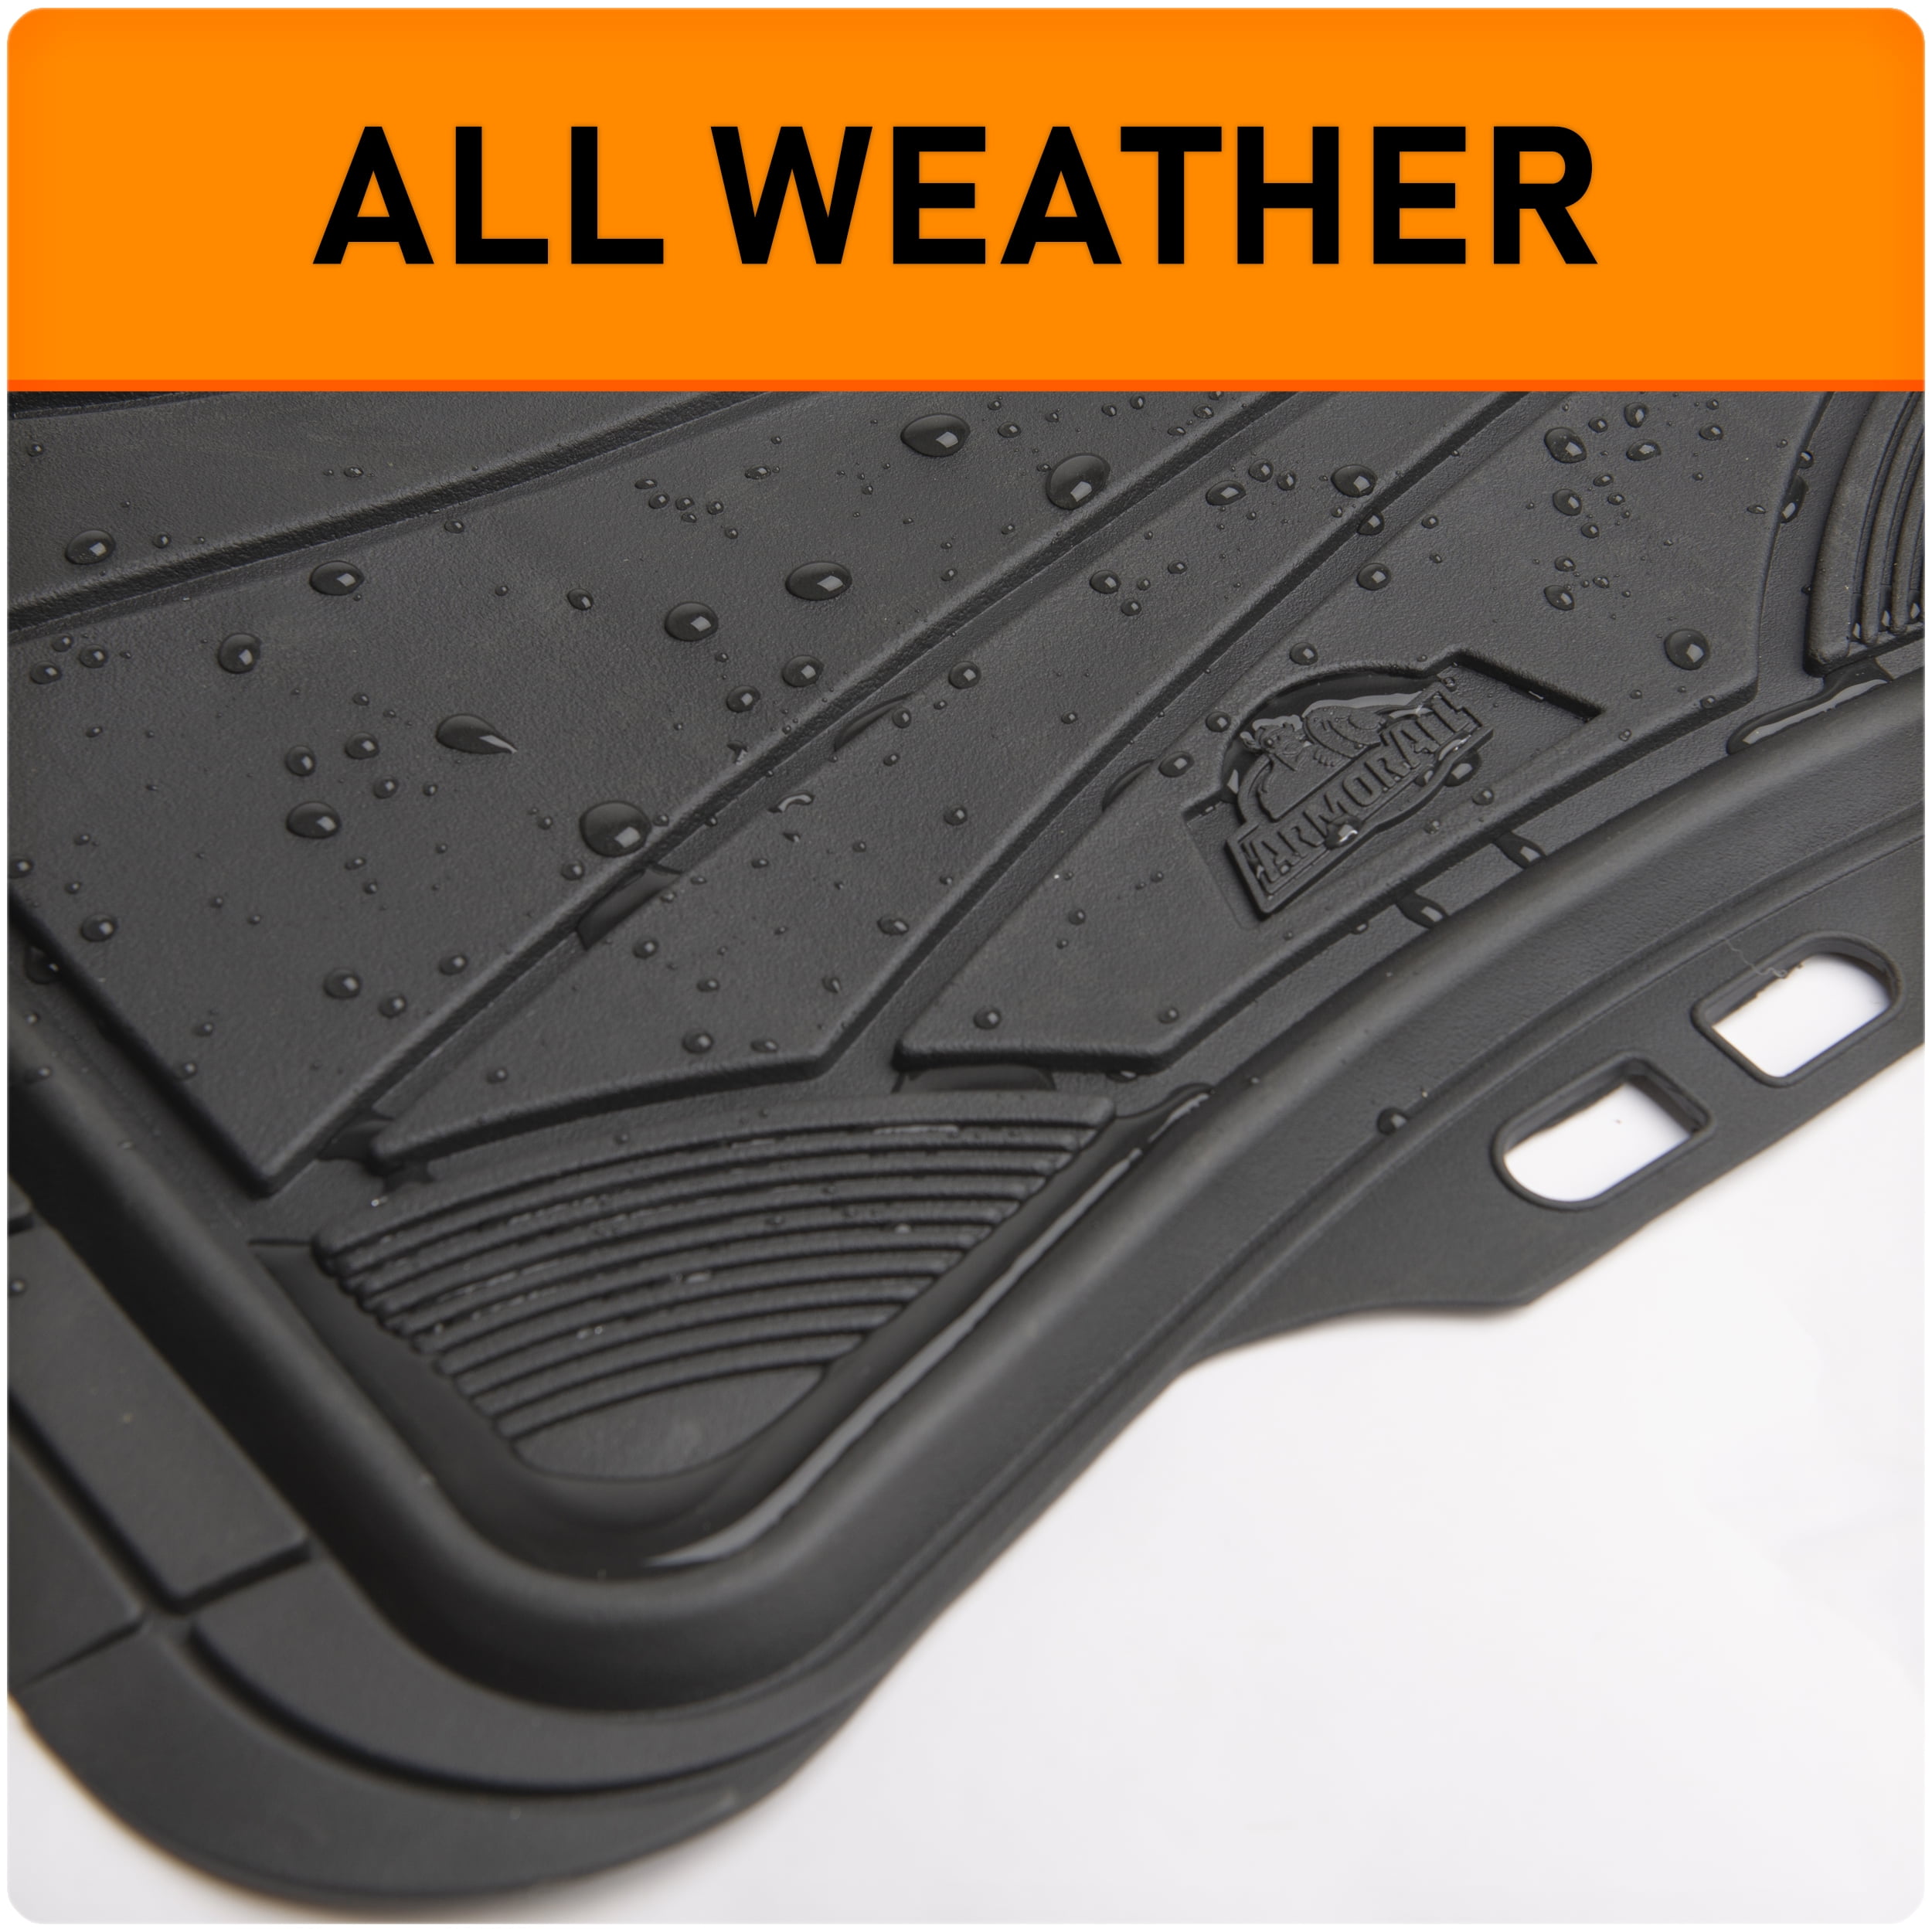 Armor All 5-Piece All Weather Protection Defender Car, Truck, SUV Floor Mats,  Auto, Rubber, Universal, Custom, Set, Front, Back, Black 